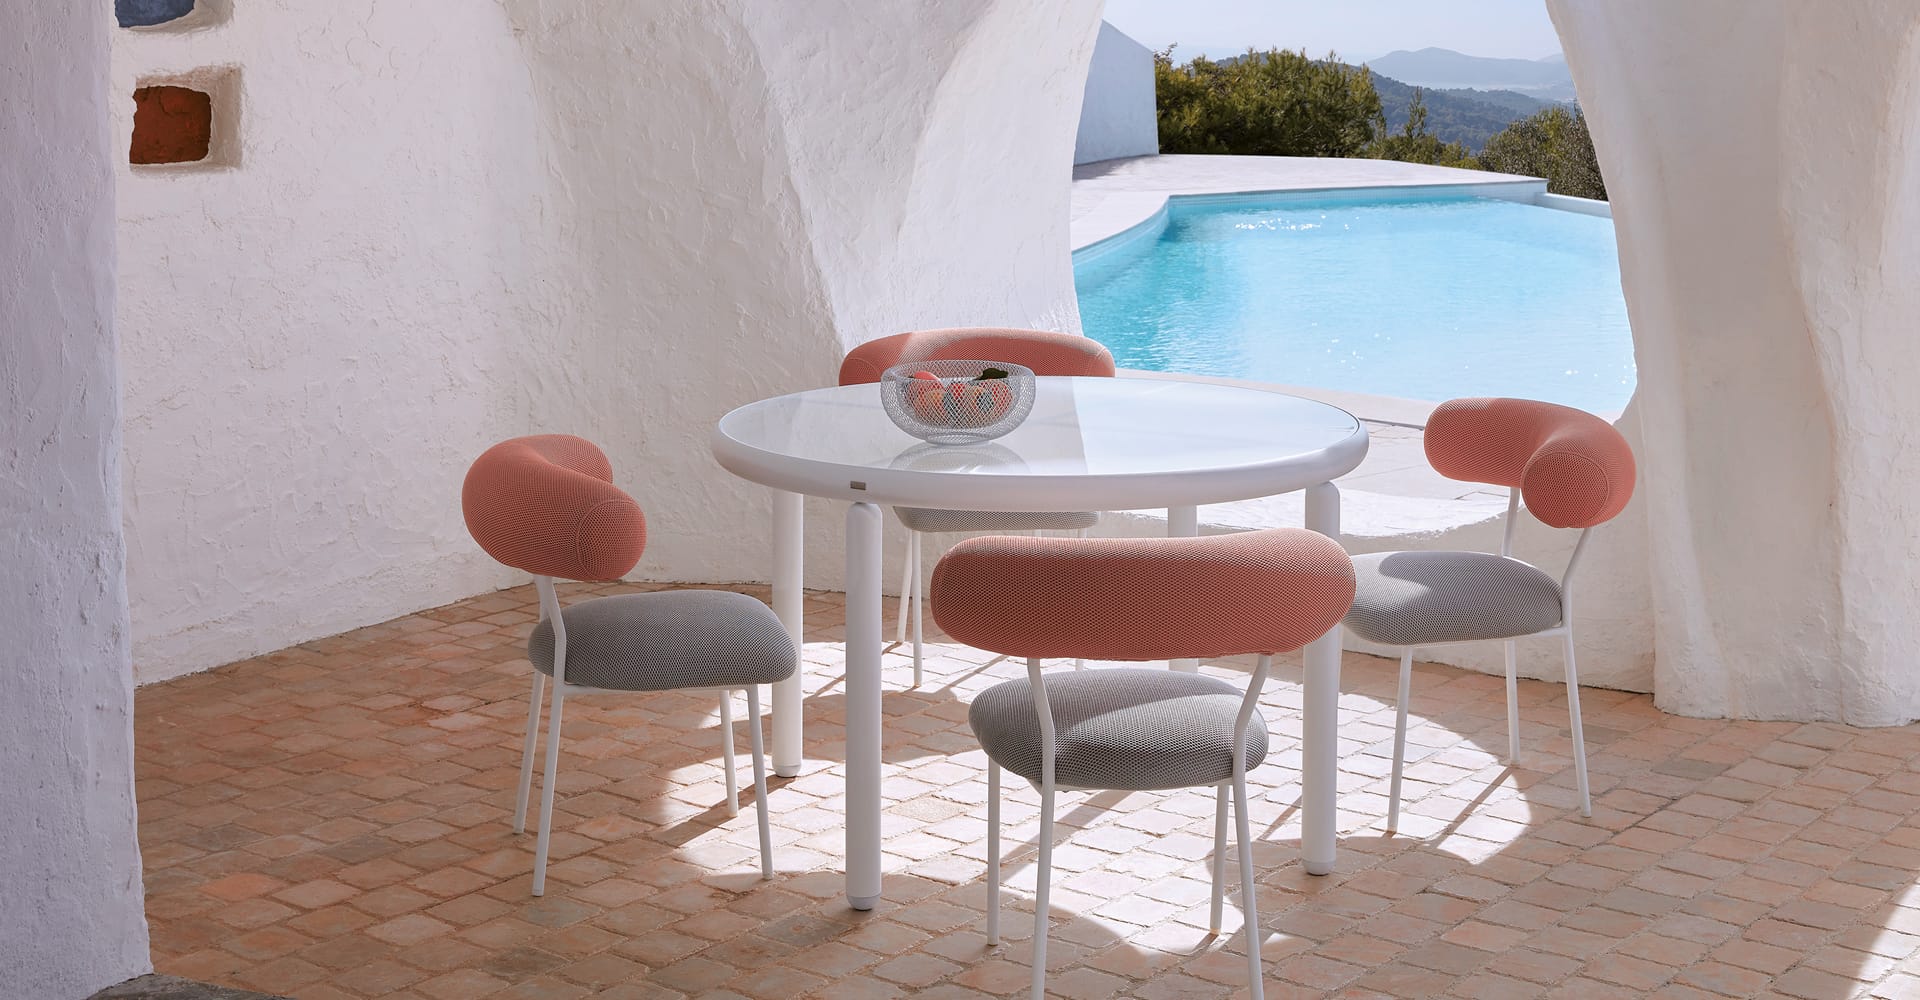 sifas-big-roll-mobilier-repas-patio